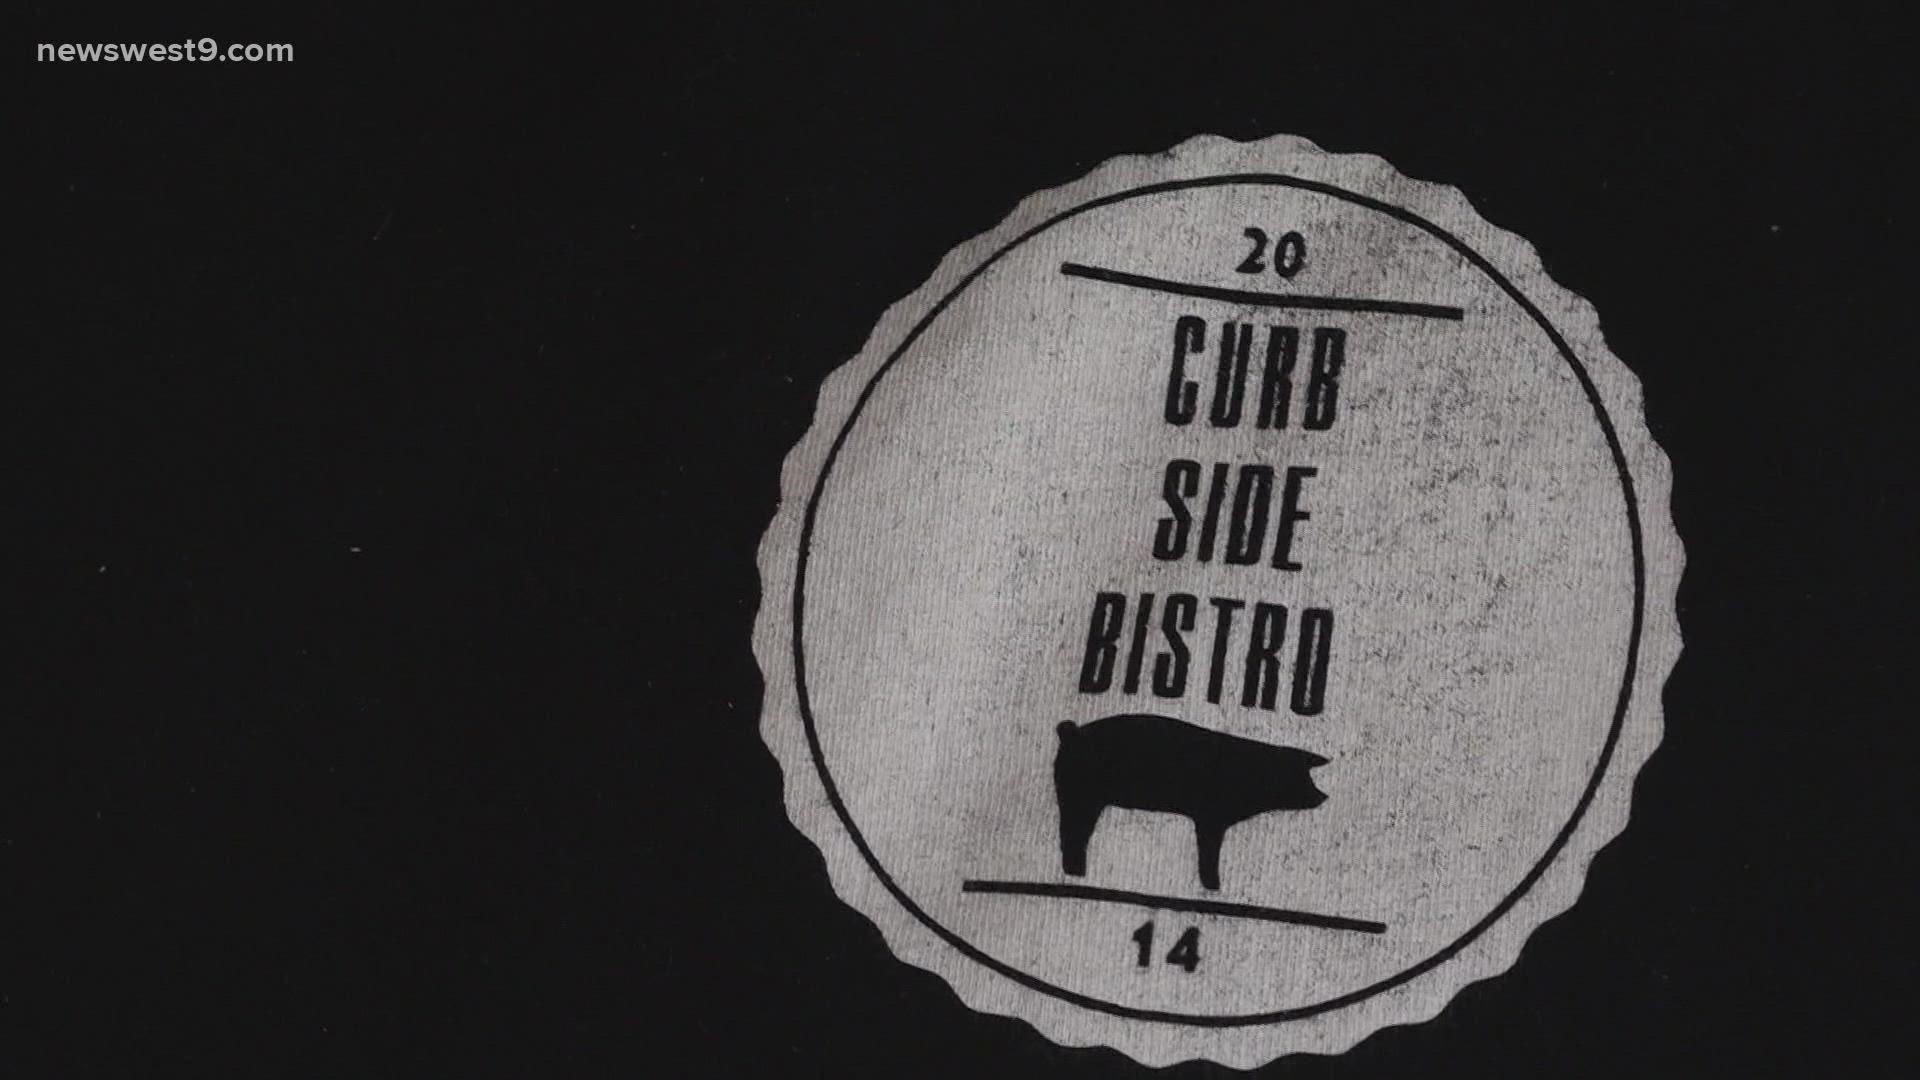 The co-owner of Curb Side Bistro told NewsWest 9 employees and staff are limited, but so are the products and produce they need to operate.